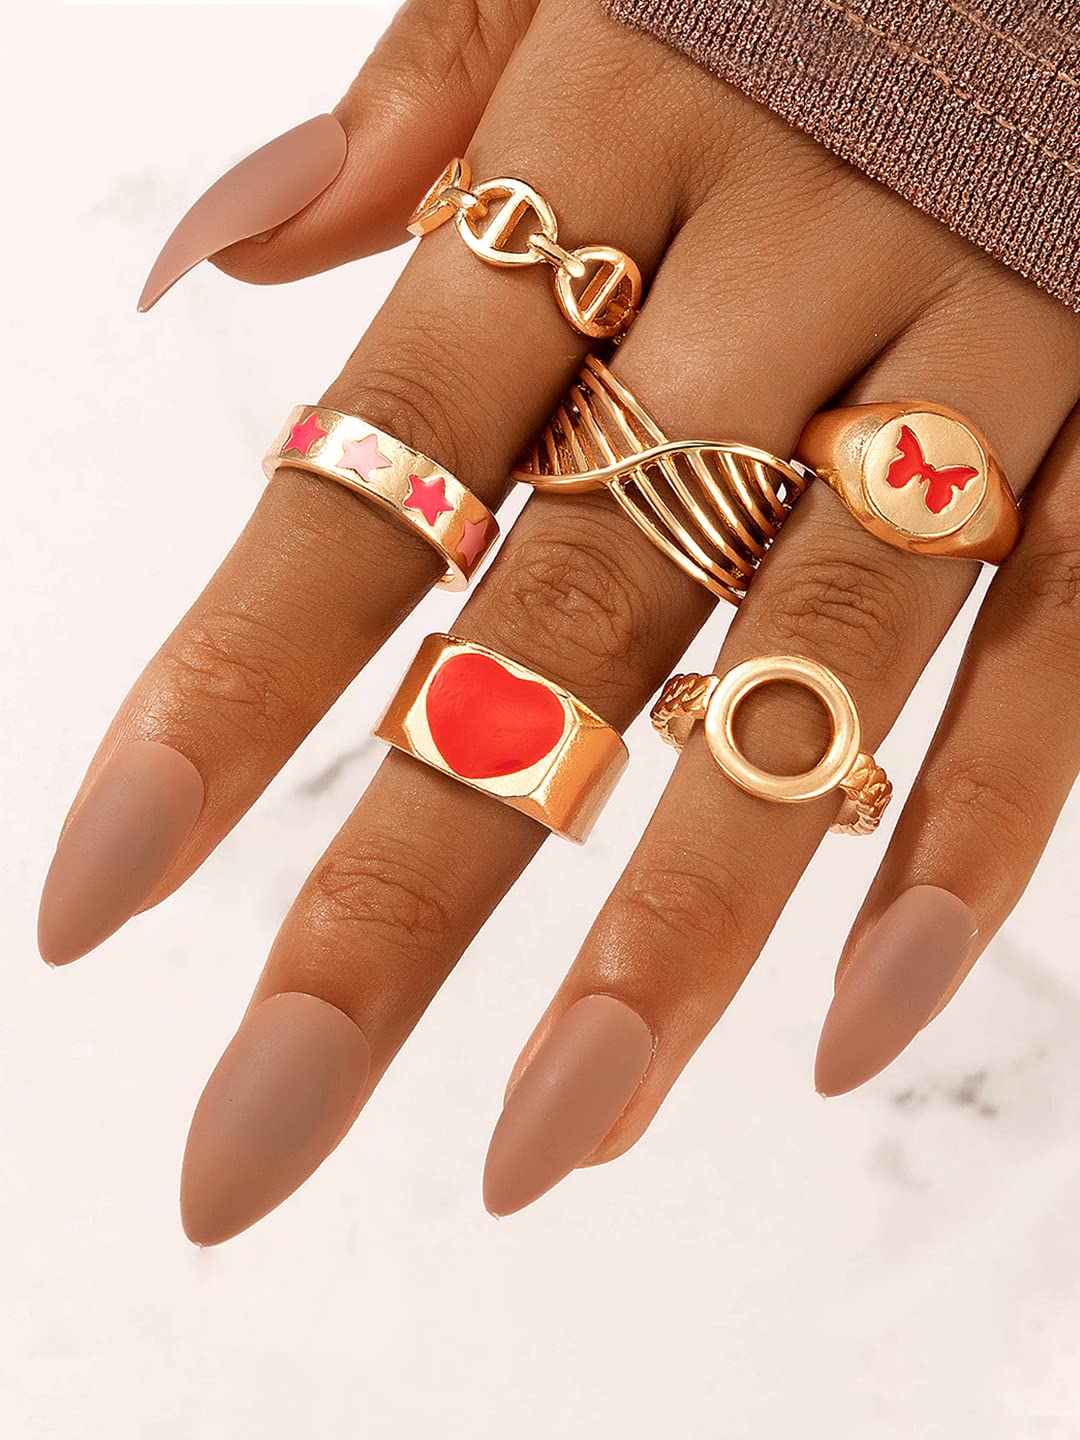 Elephant Flower Rose Heart Crown Carved Rings Set Knuckle Finger Midi Ring  - Bohemian Beach Boutique